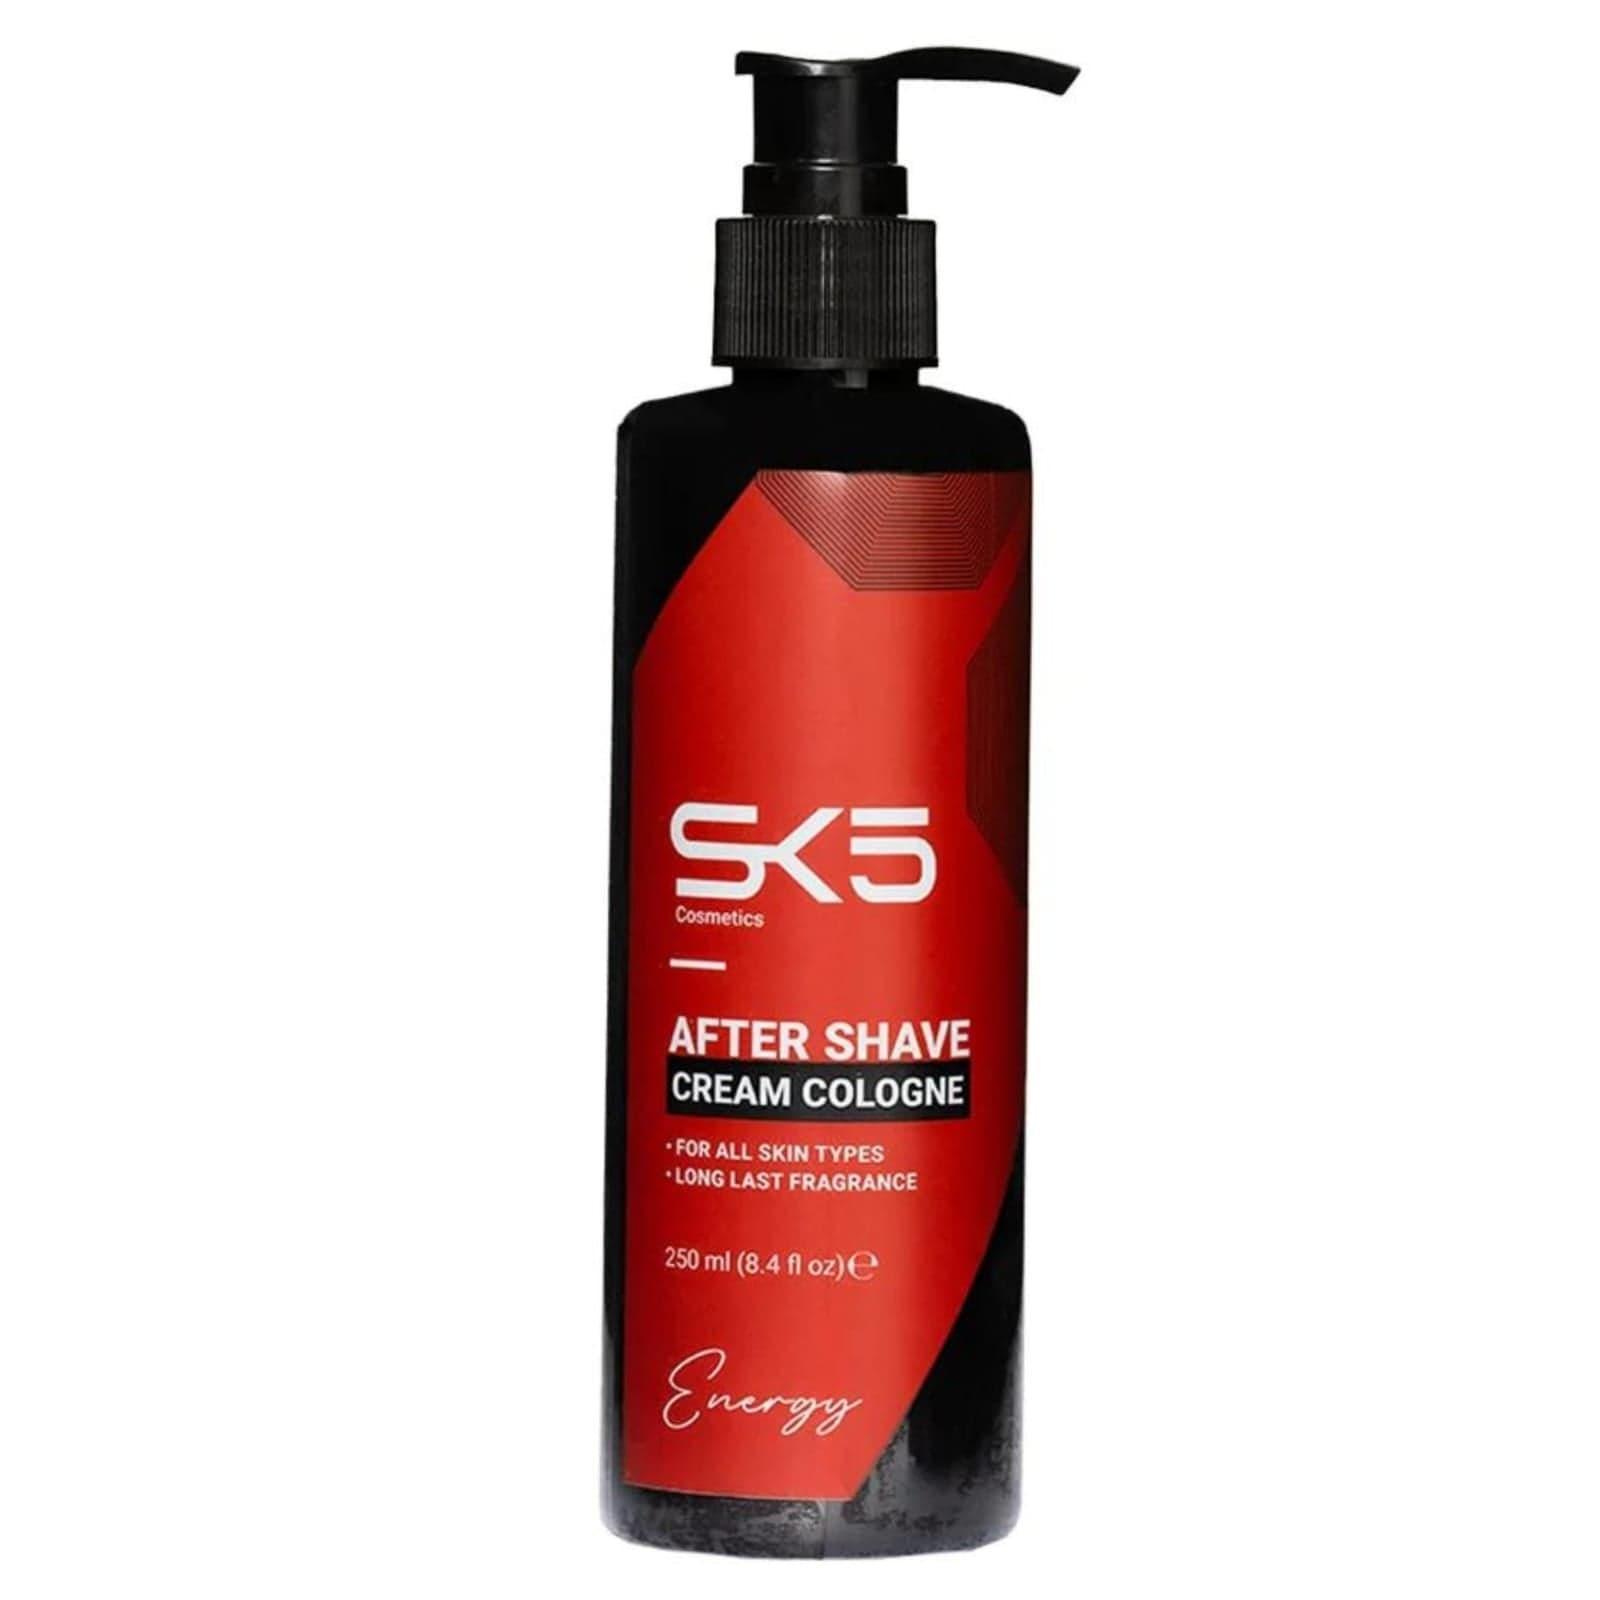 SK5 After Shave Cream Cologne Energy 250ml